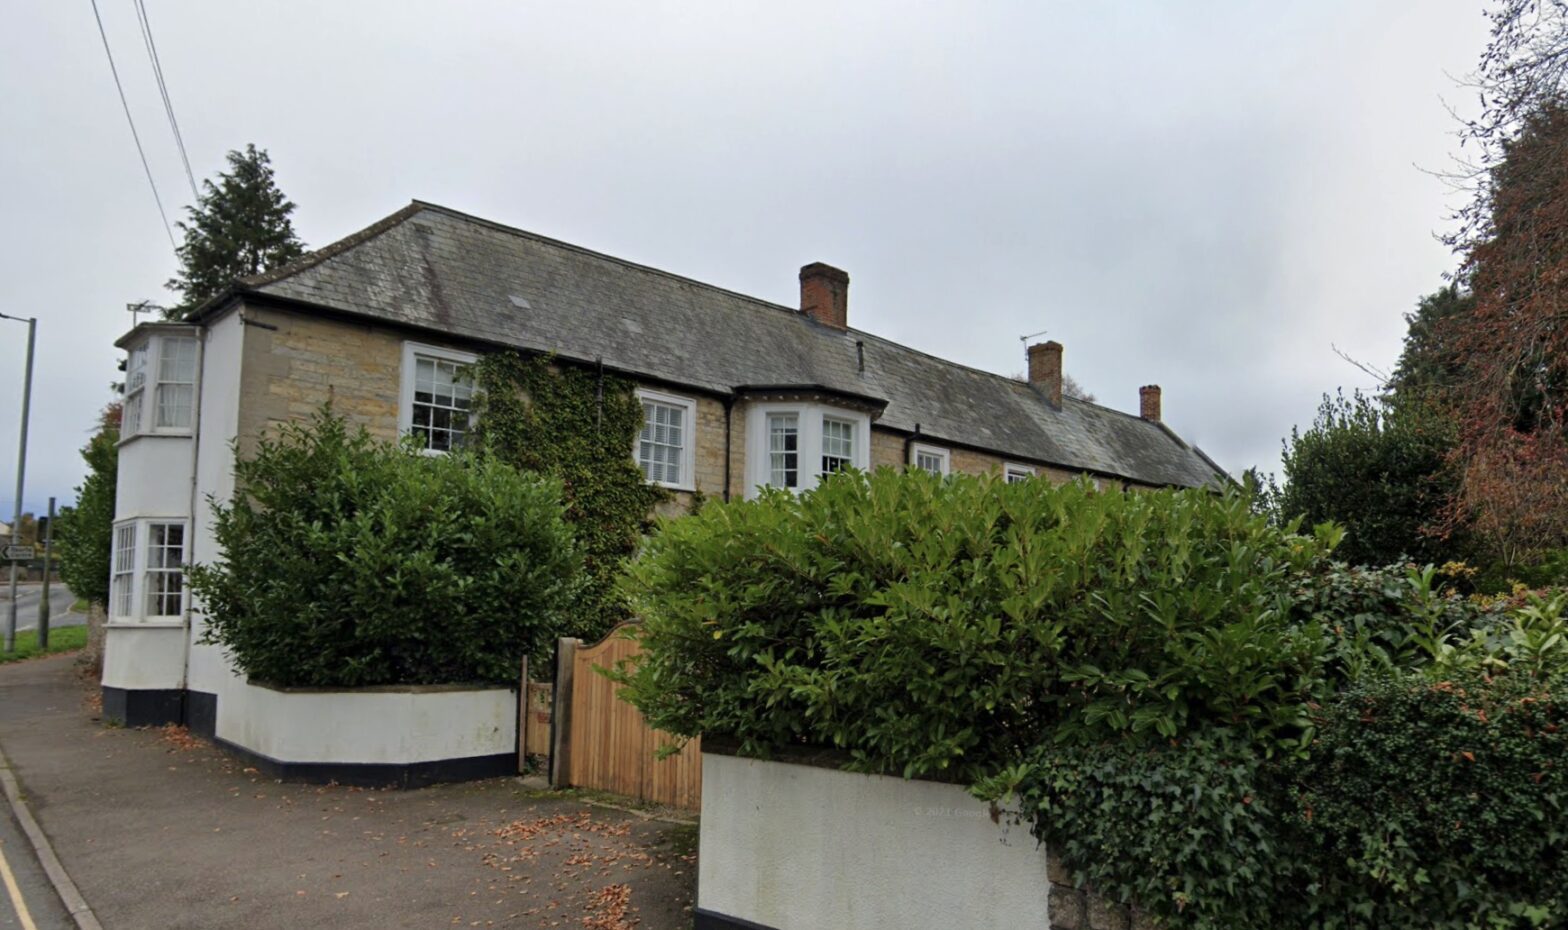 Rupert Robinson – Listed Building Consent, Planning Application for Maintenance Works and New Driveway – Axminster, Devon